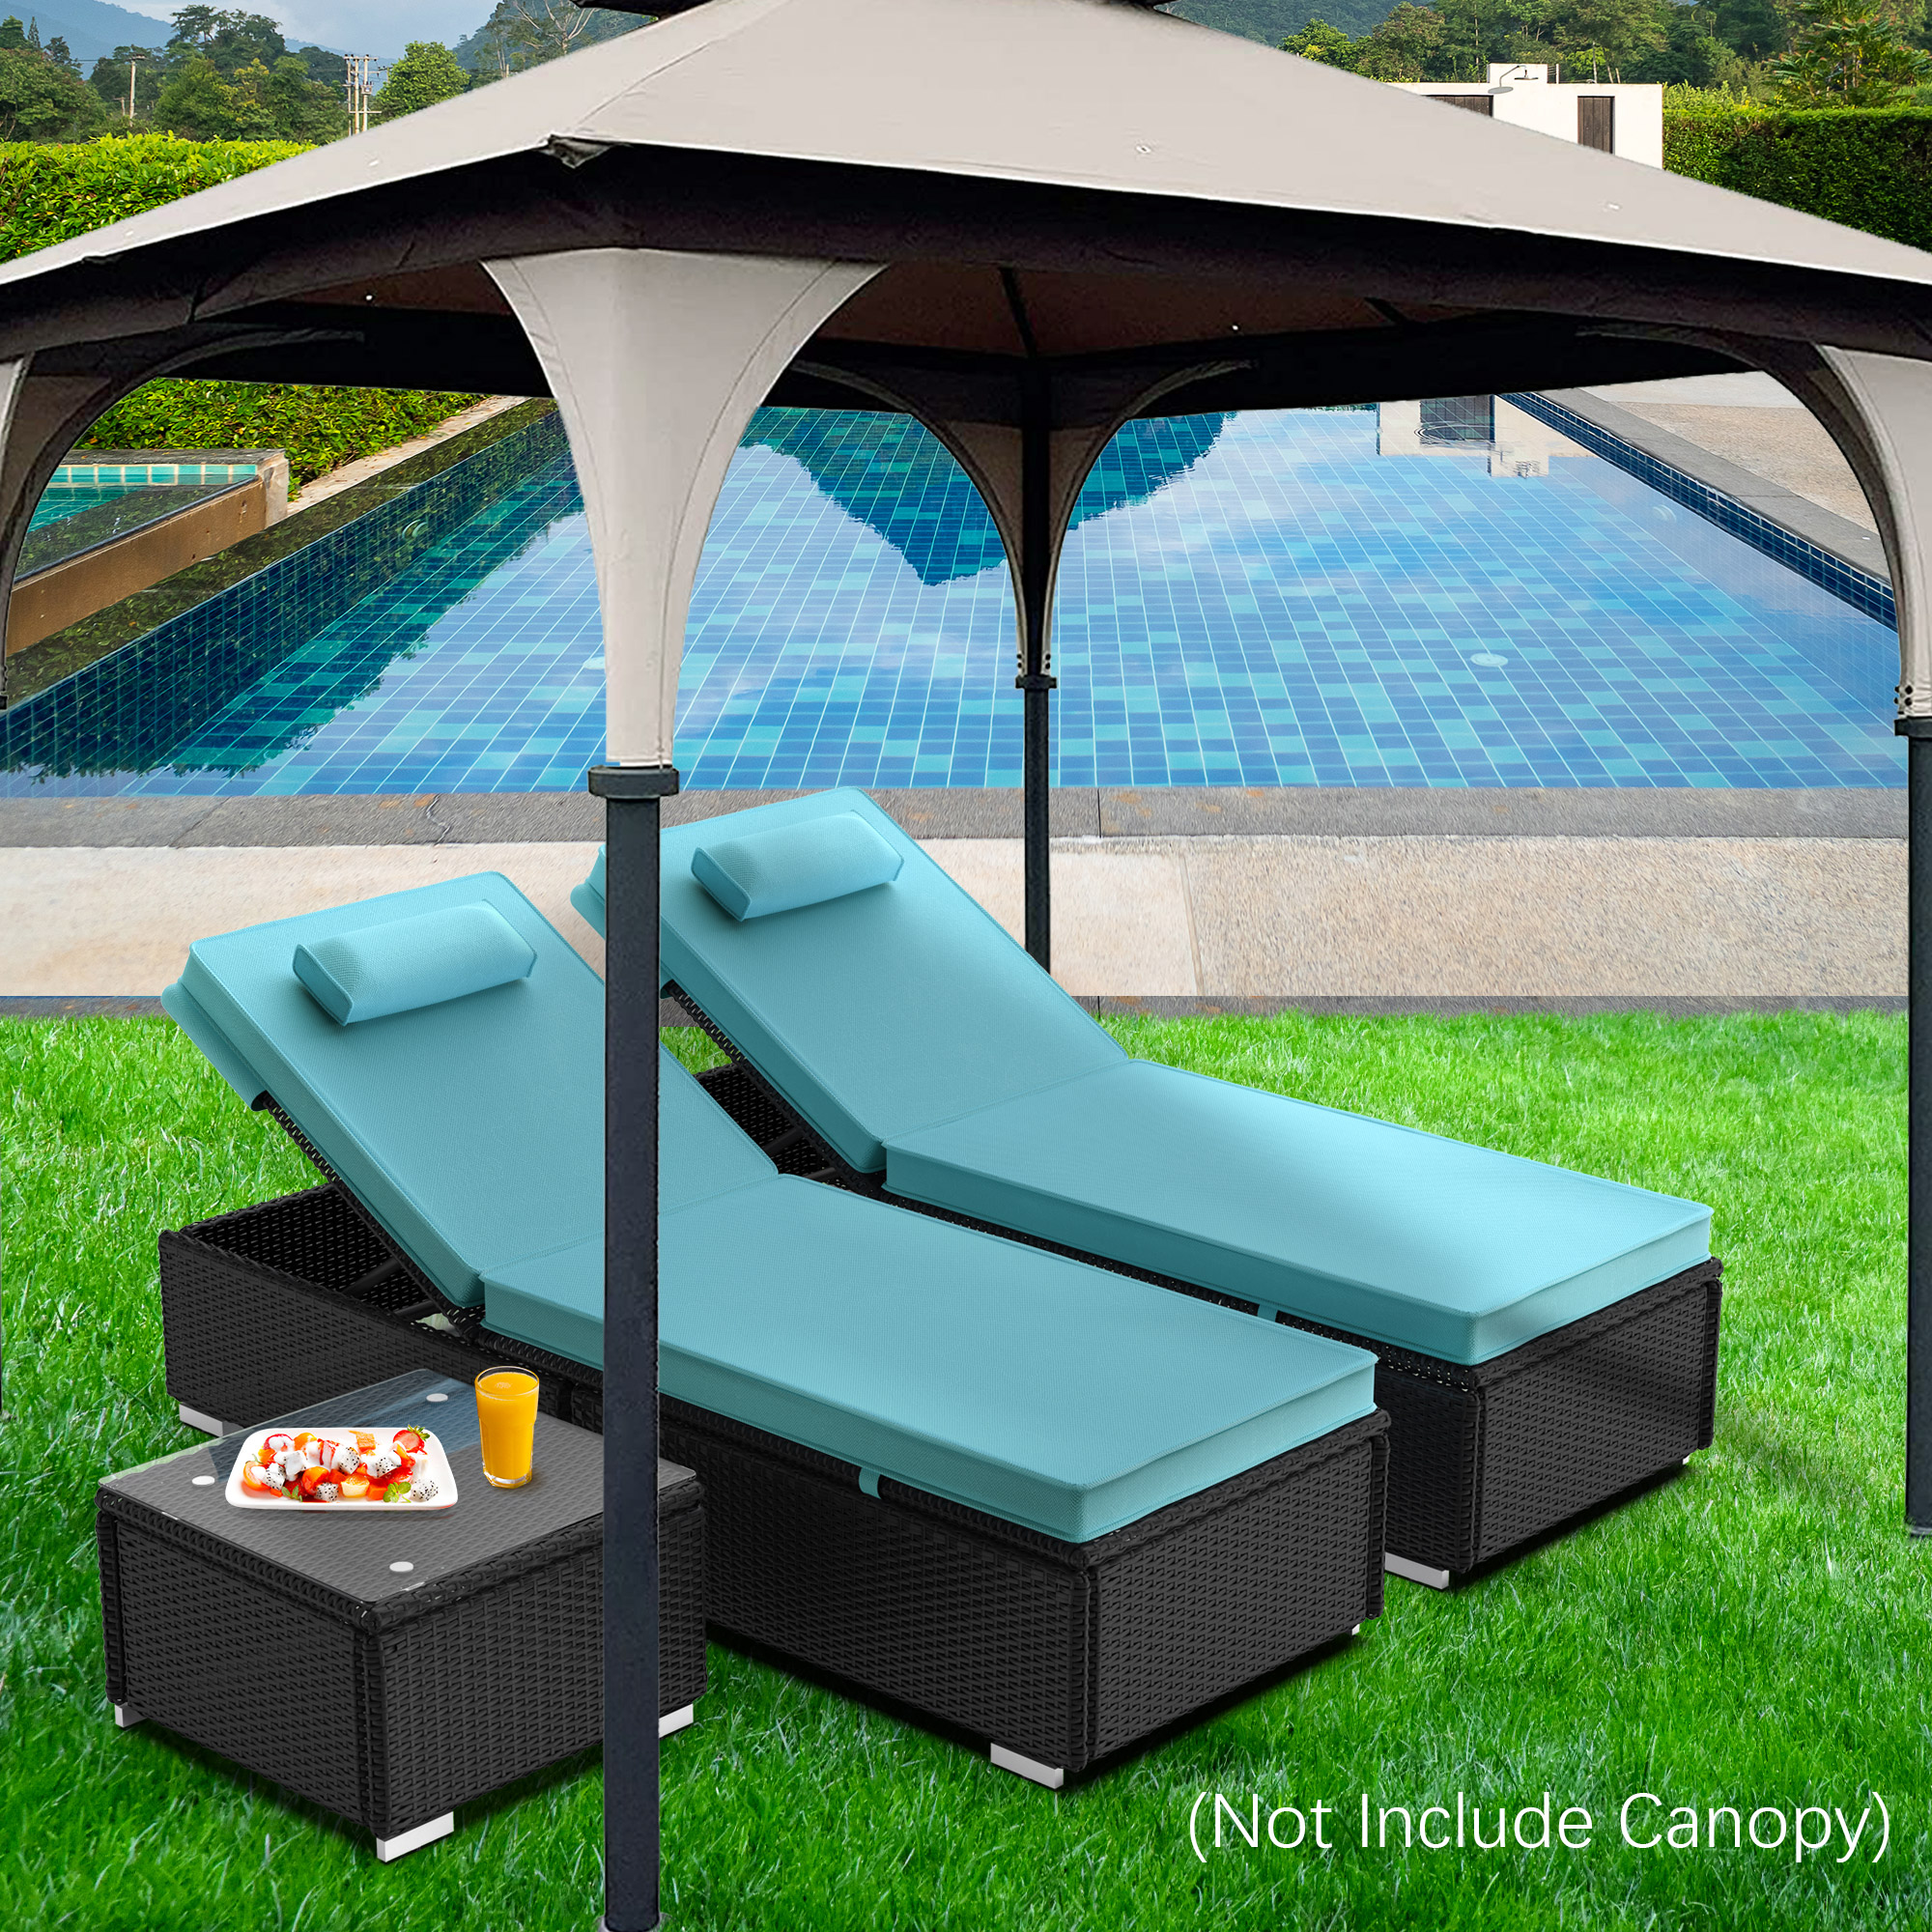 Outdoor 3-Piece Patio Furniture Sets, All-Weather Wicker Pool Reclining Chaise Chairs Set with 2 Pillows, 5-Level Angles Adjust Backrest Outdoor Lounge with Coffee Table & Cushions, S1547 - image 3 of 12